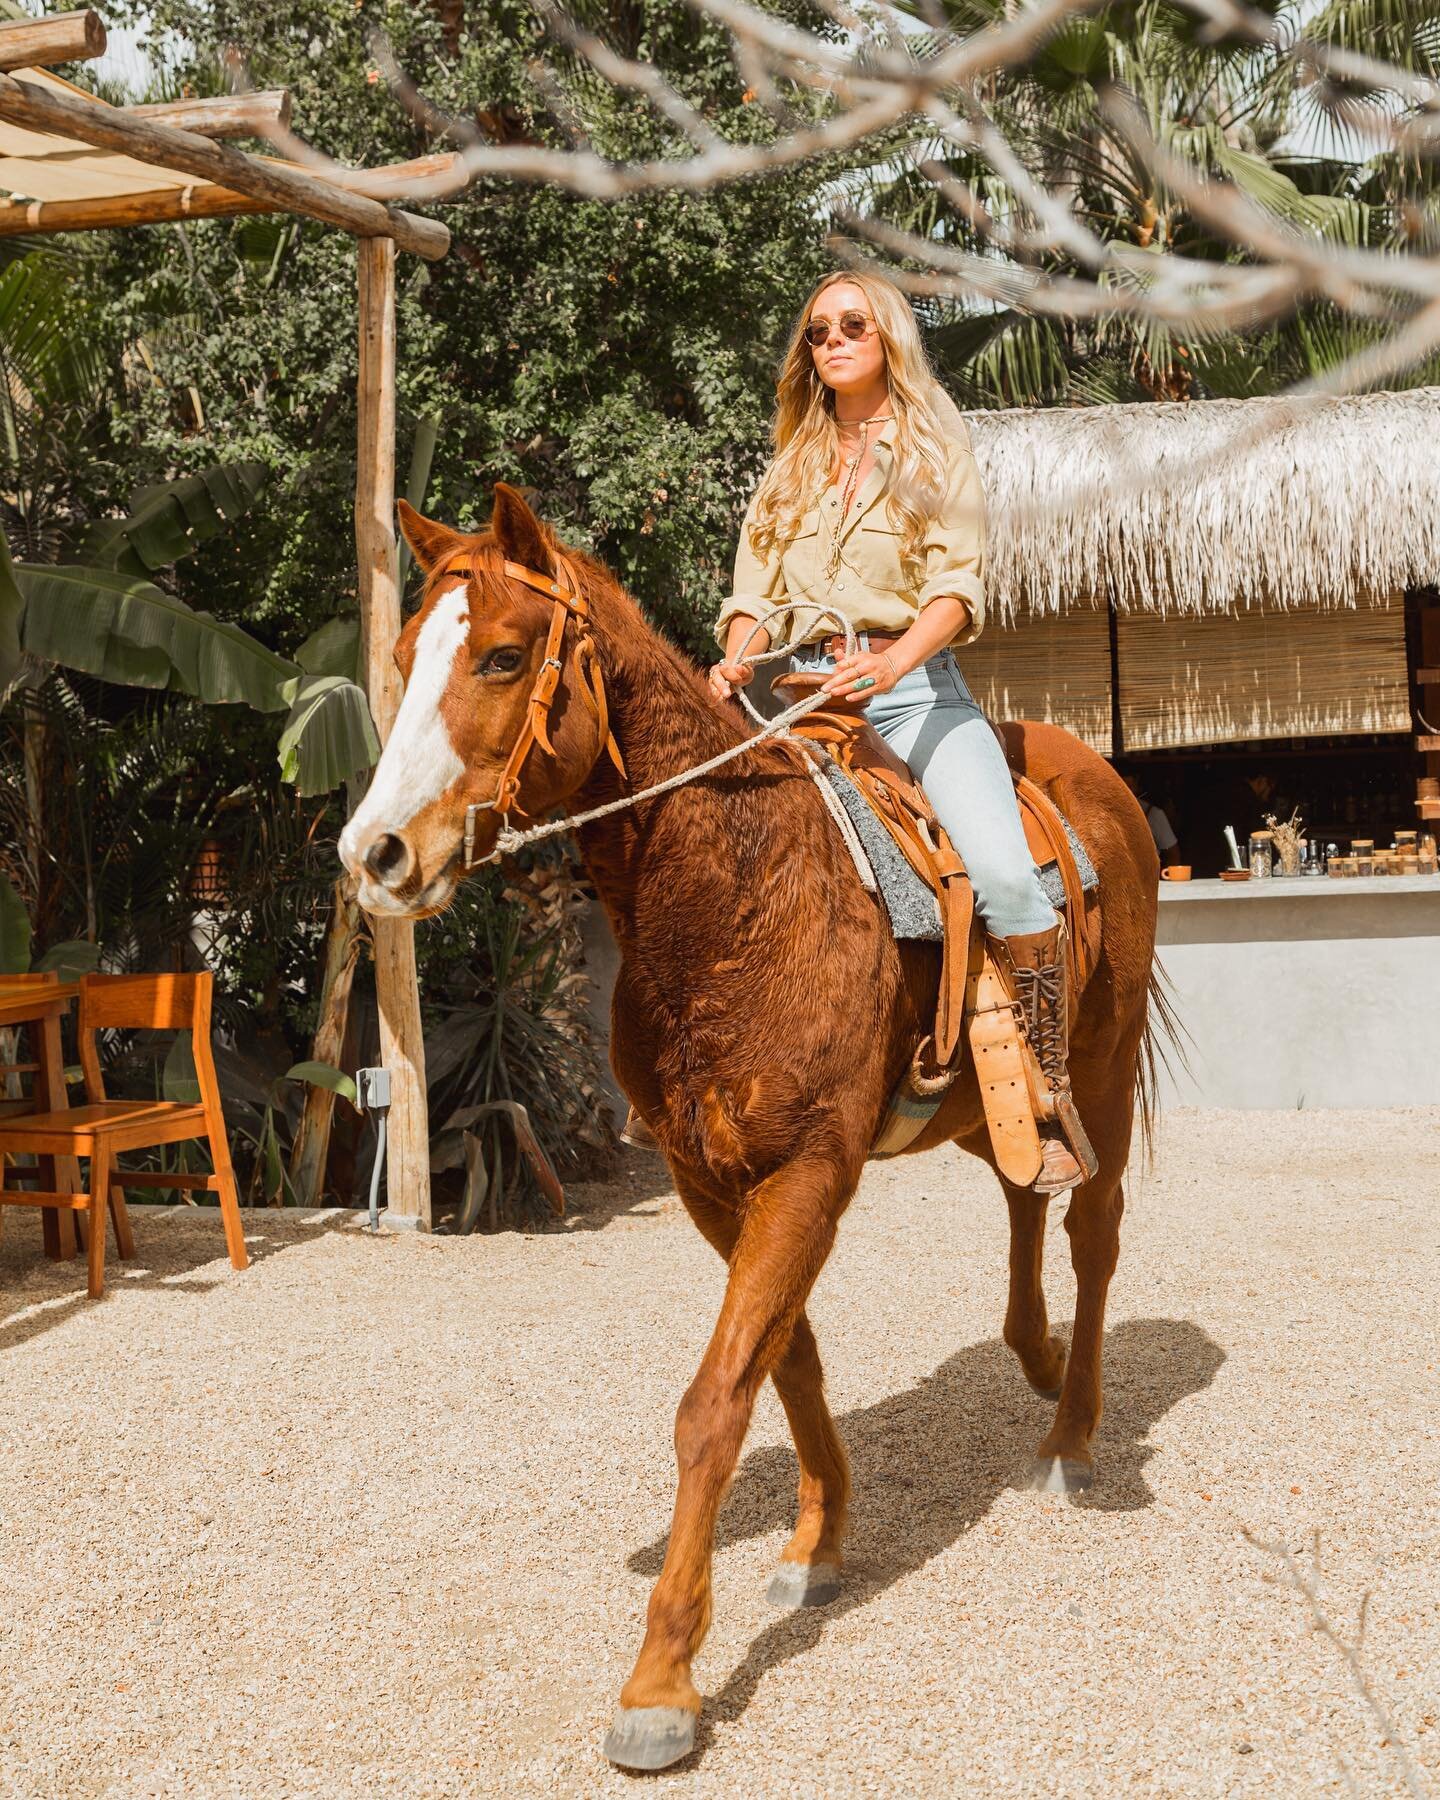 We had the best time with @equus_delsur horsies at Cien Palmas!! Such a fun experience and in just a few days we&rsquo;ll all be hosting an event together:
Esp&iacute;ritu De Equus Sur - A Night Of Giving 

Date: April 3rd, 2024
Time: 7:30 pm
Locatio